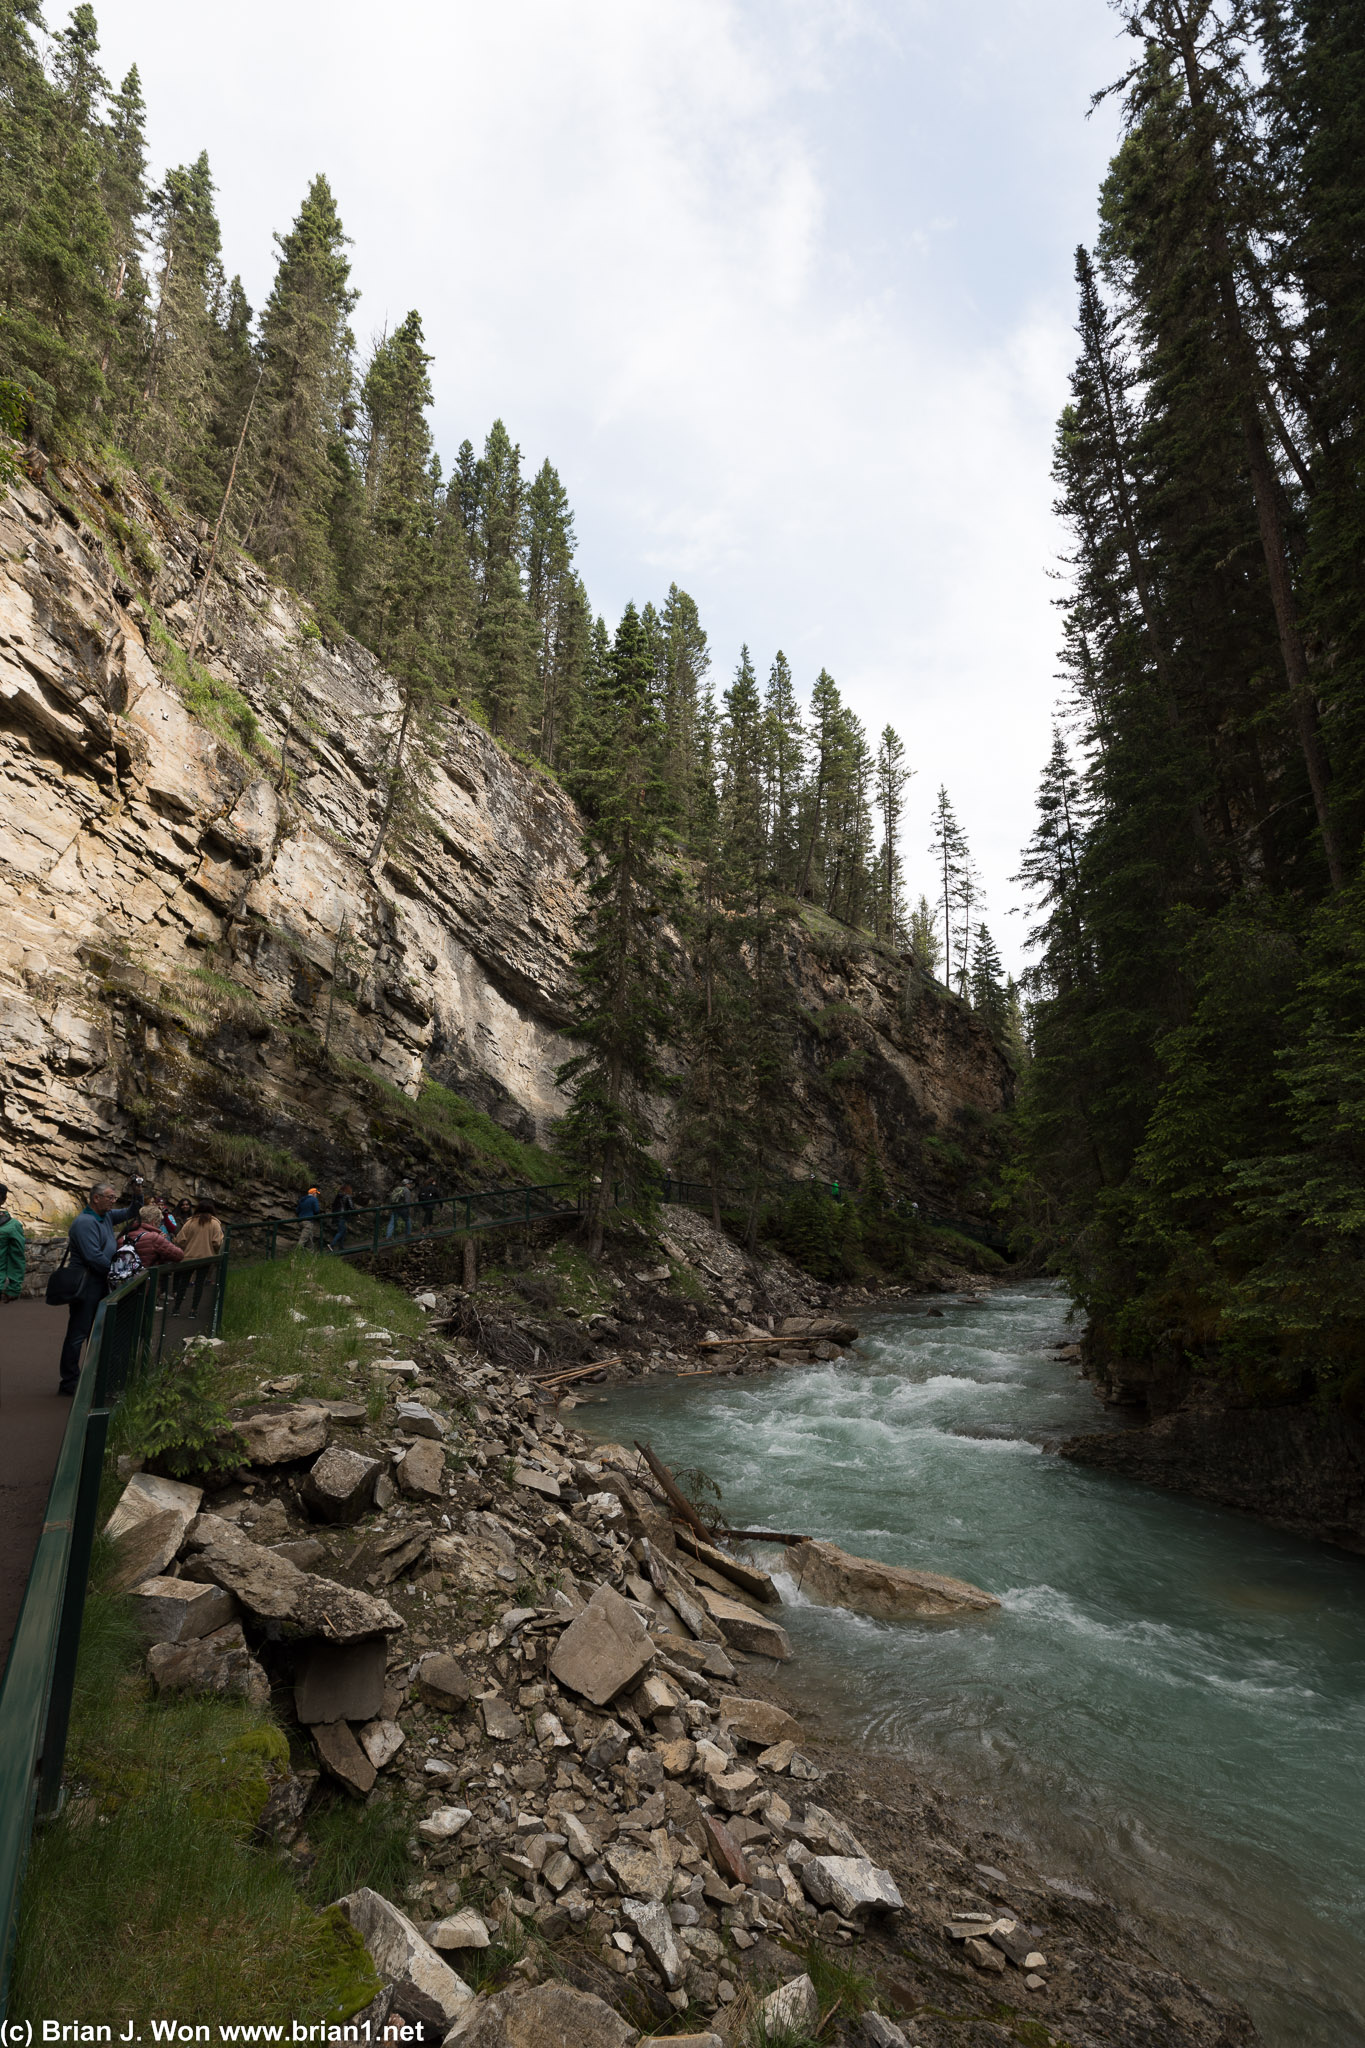 Johnston Canyon had even more amazing views, but a lot of the trail was too narrow to stop and take a picture!